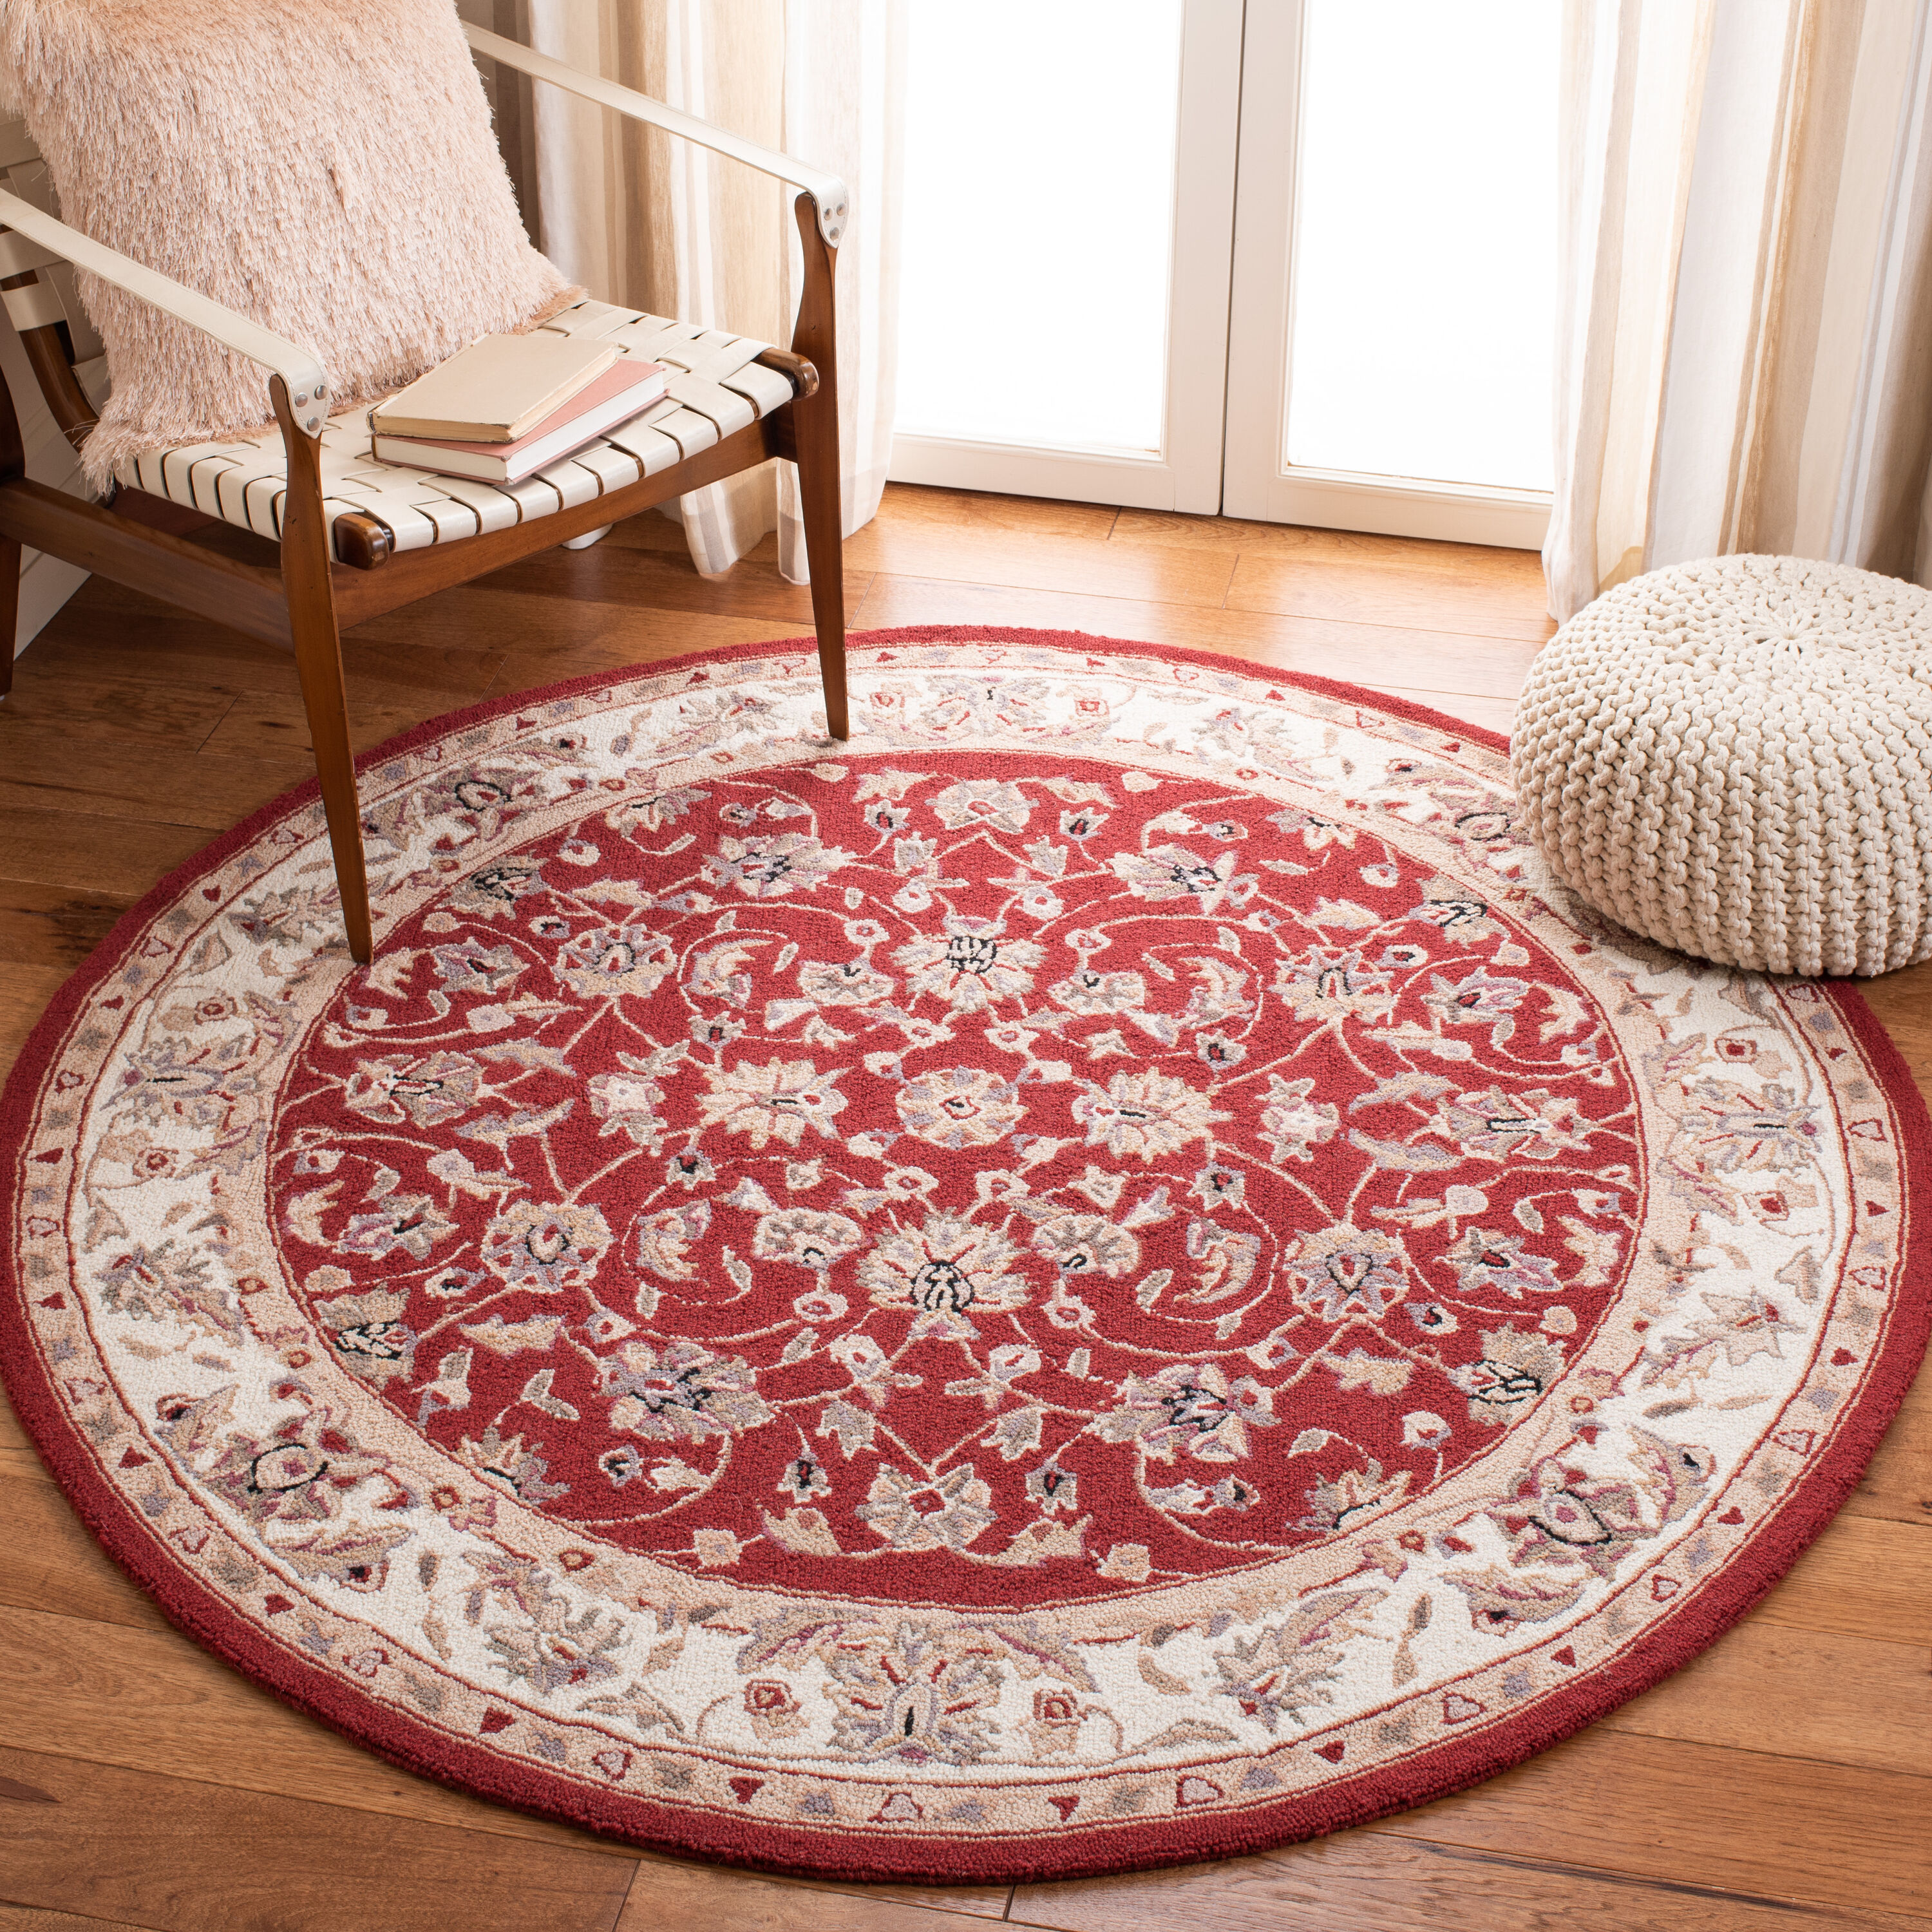 Safavieh Chelsea Collection Area Rug - 3' Round, Ivory & Light